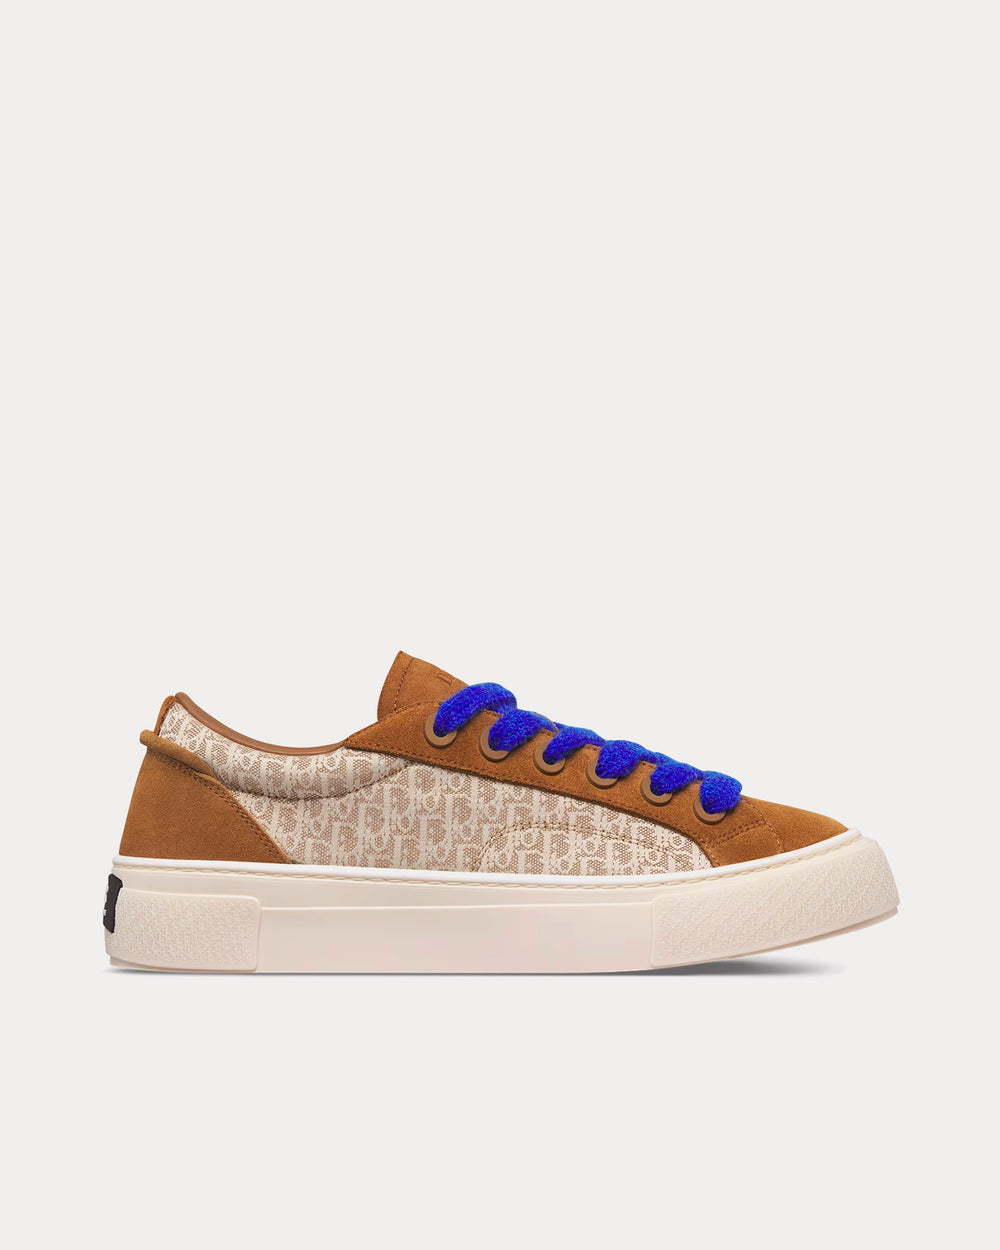 Dior B33 Brown and Cream Dior Oblique Jacquard and Brown Suede Low Top